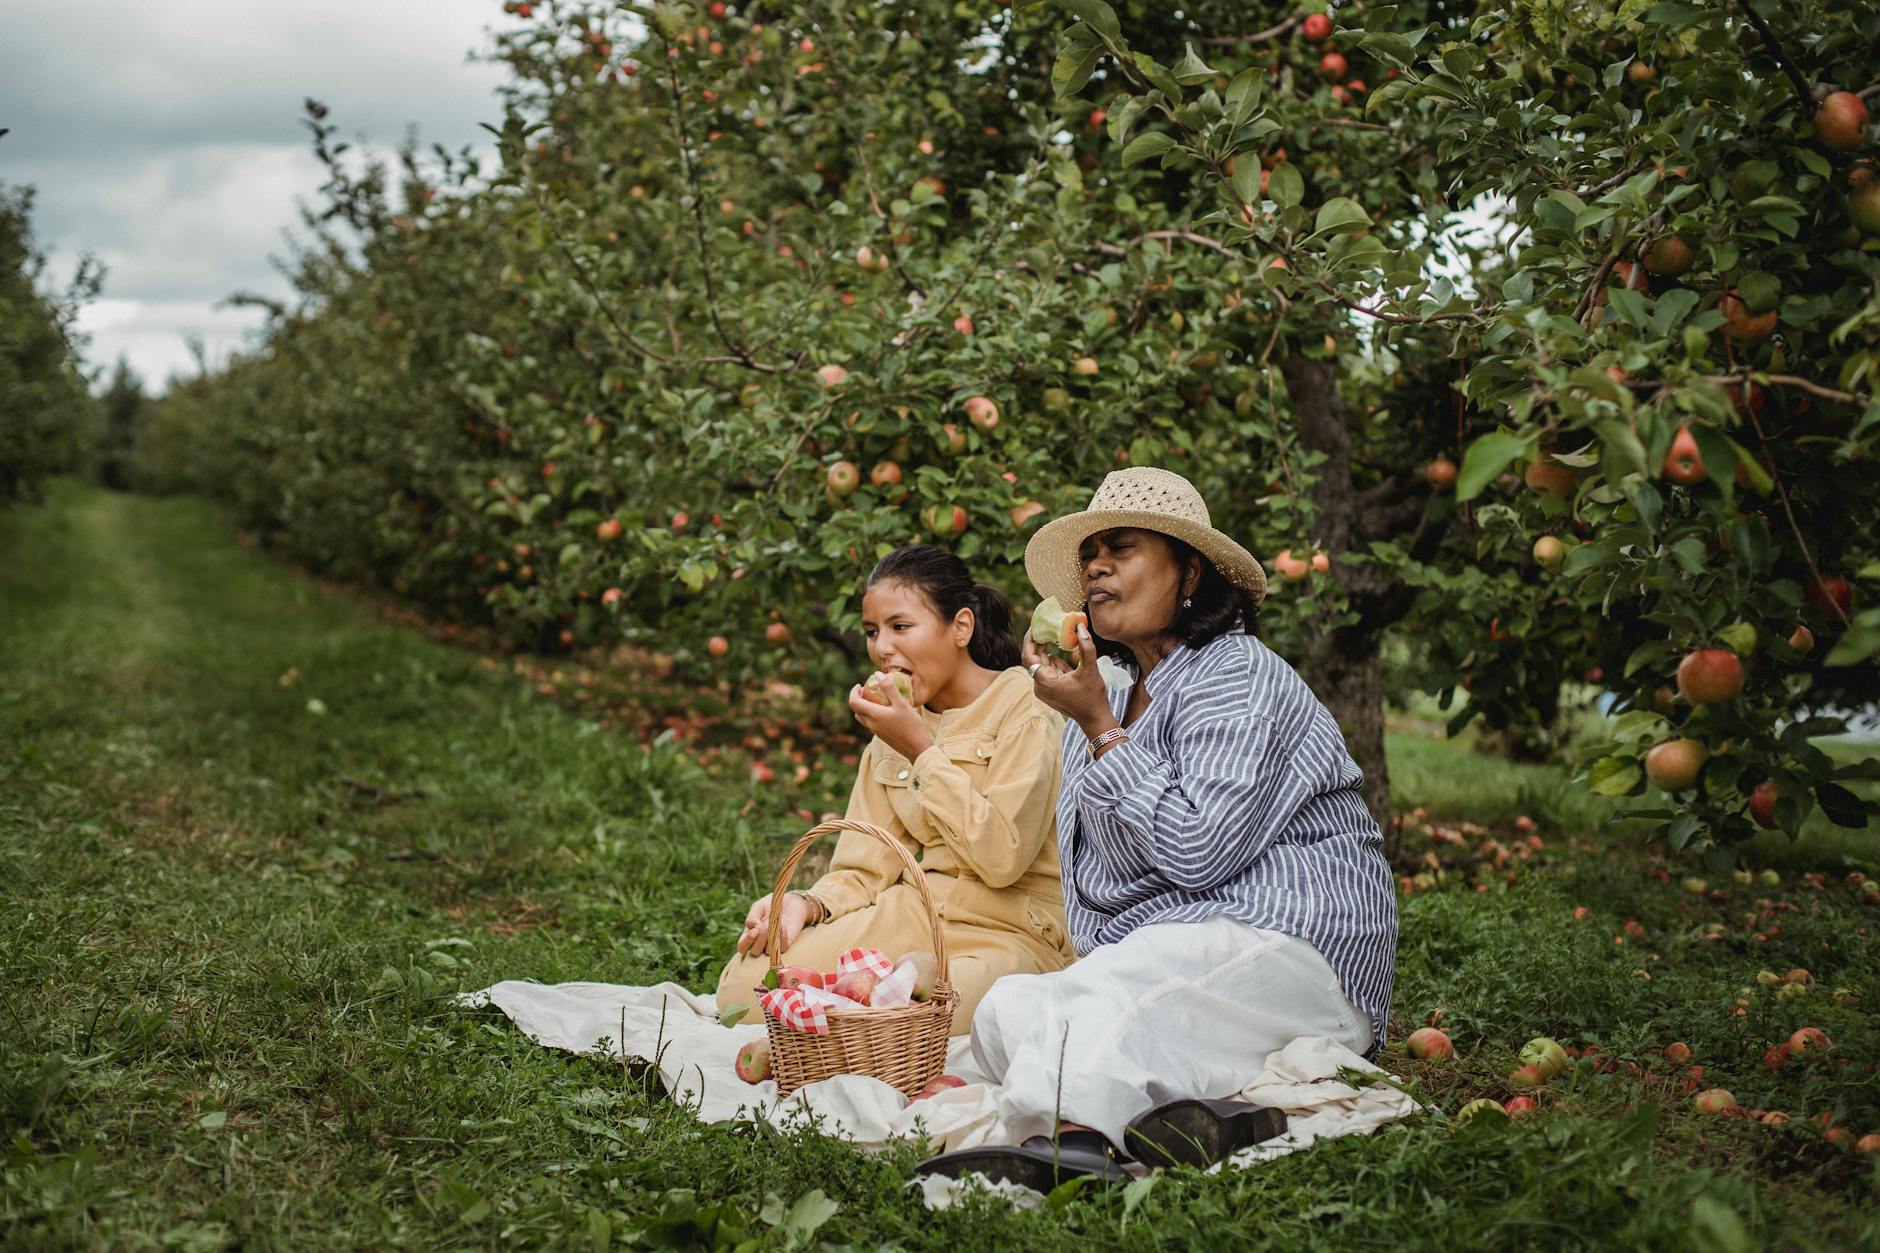 Ethnic mother and daughter eating apples during picnic